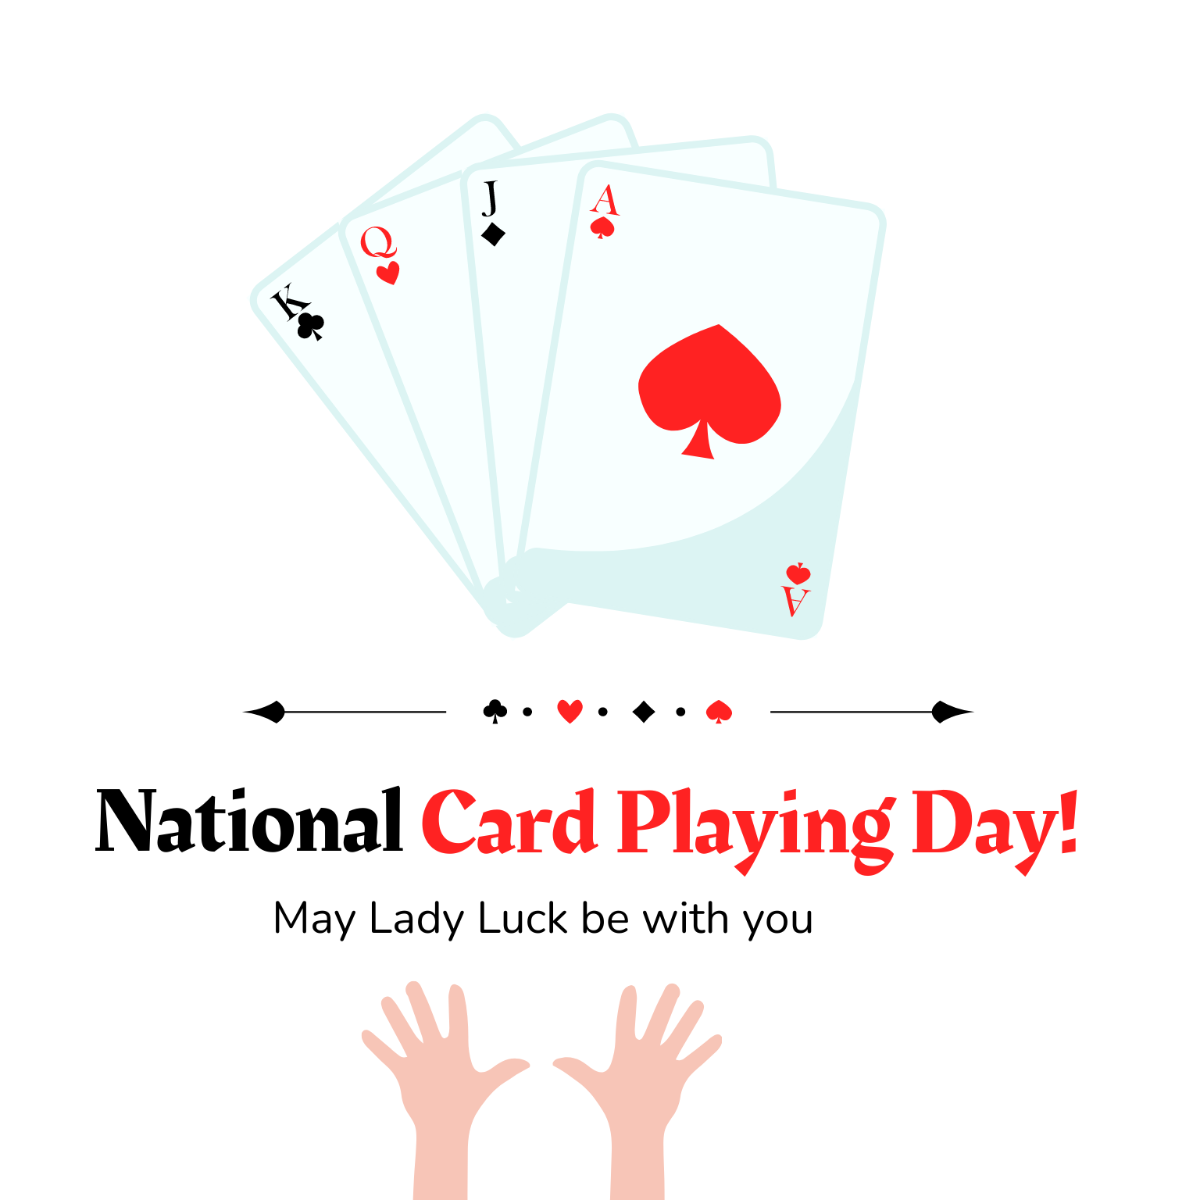 Free National Card Playing Day Wishes Vector Template